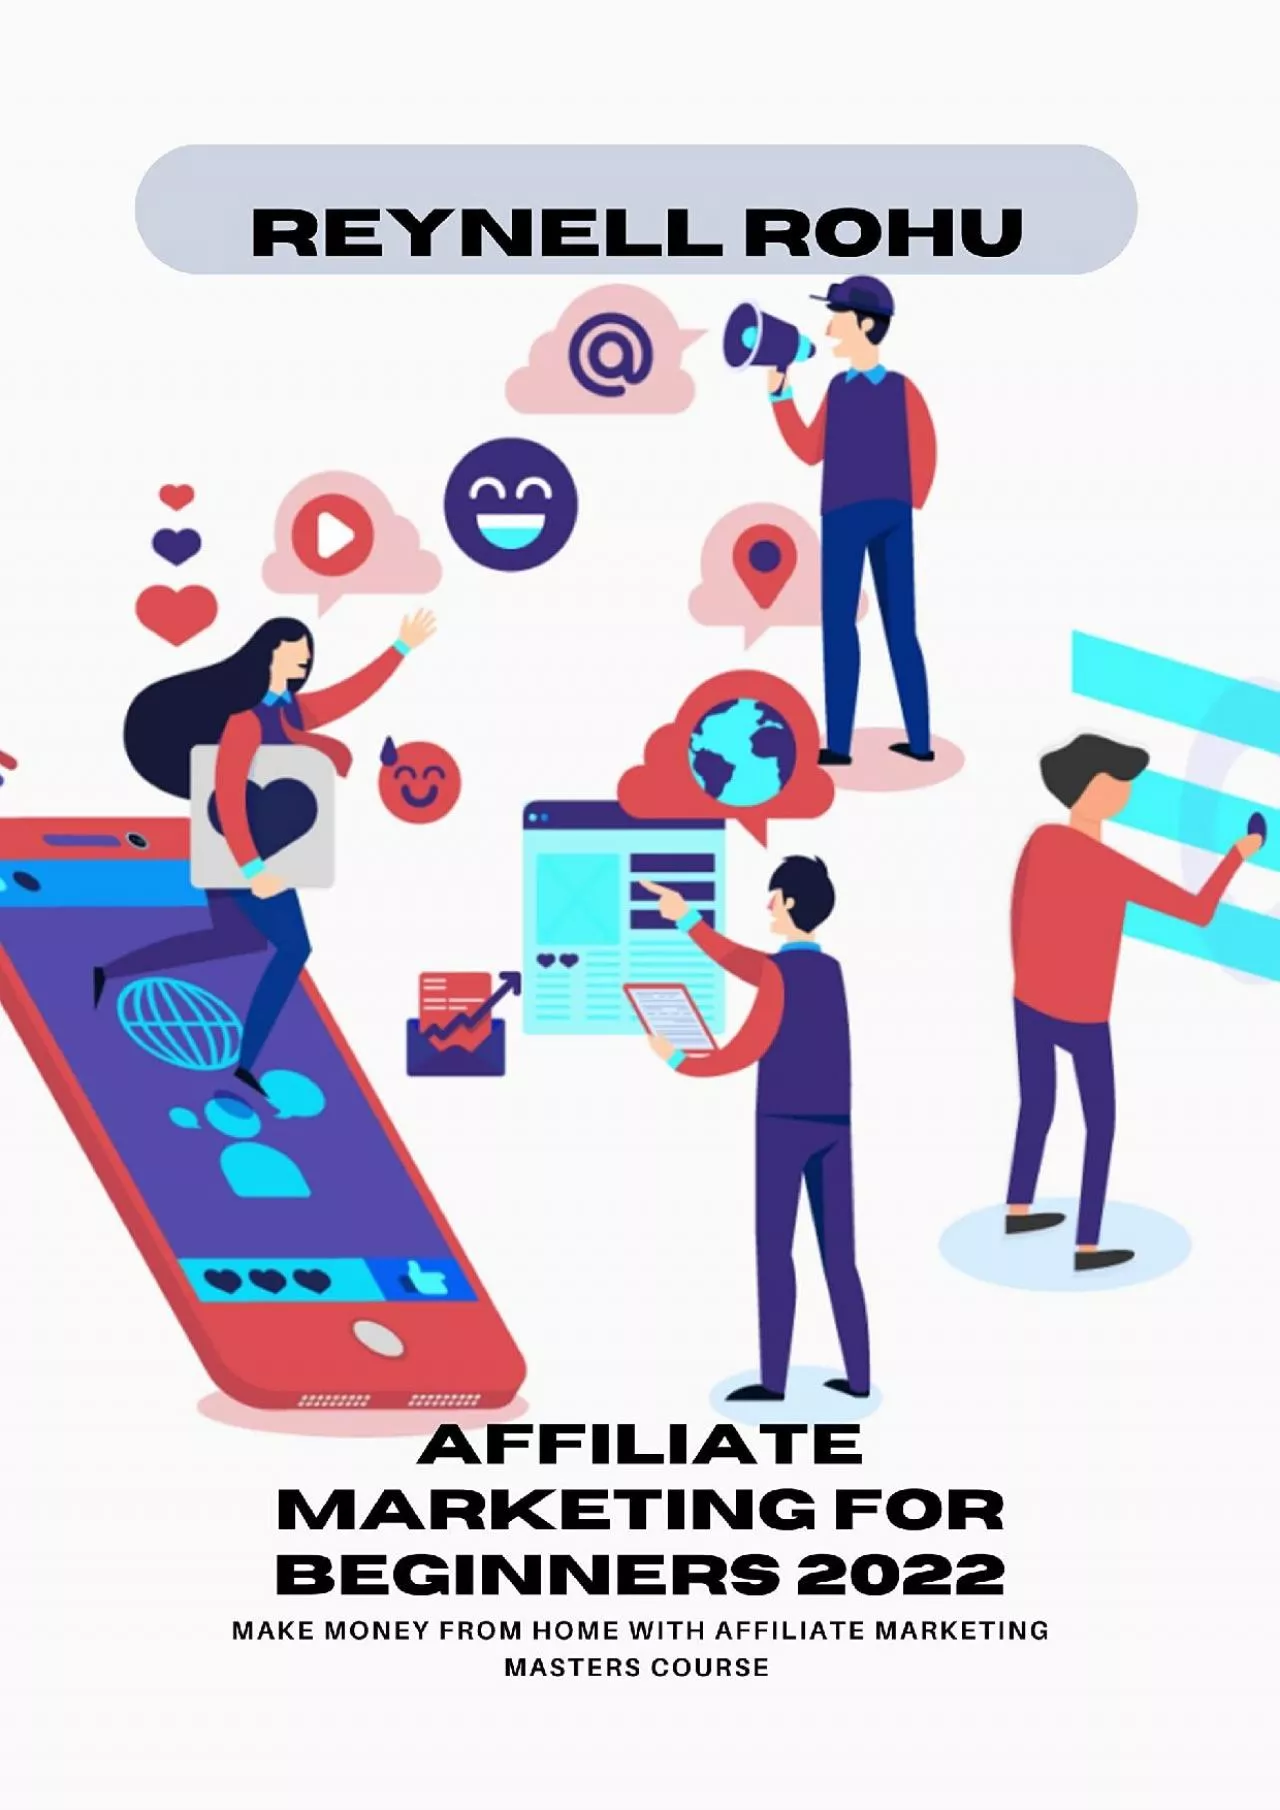 Affiliate Marketing for Beginners 2022 Make Money from Home with Affiliate Marketing Masters